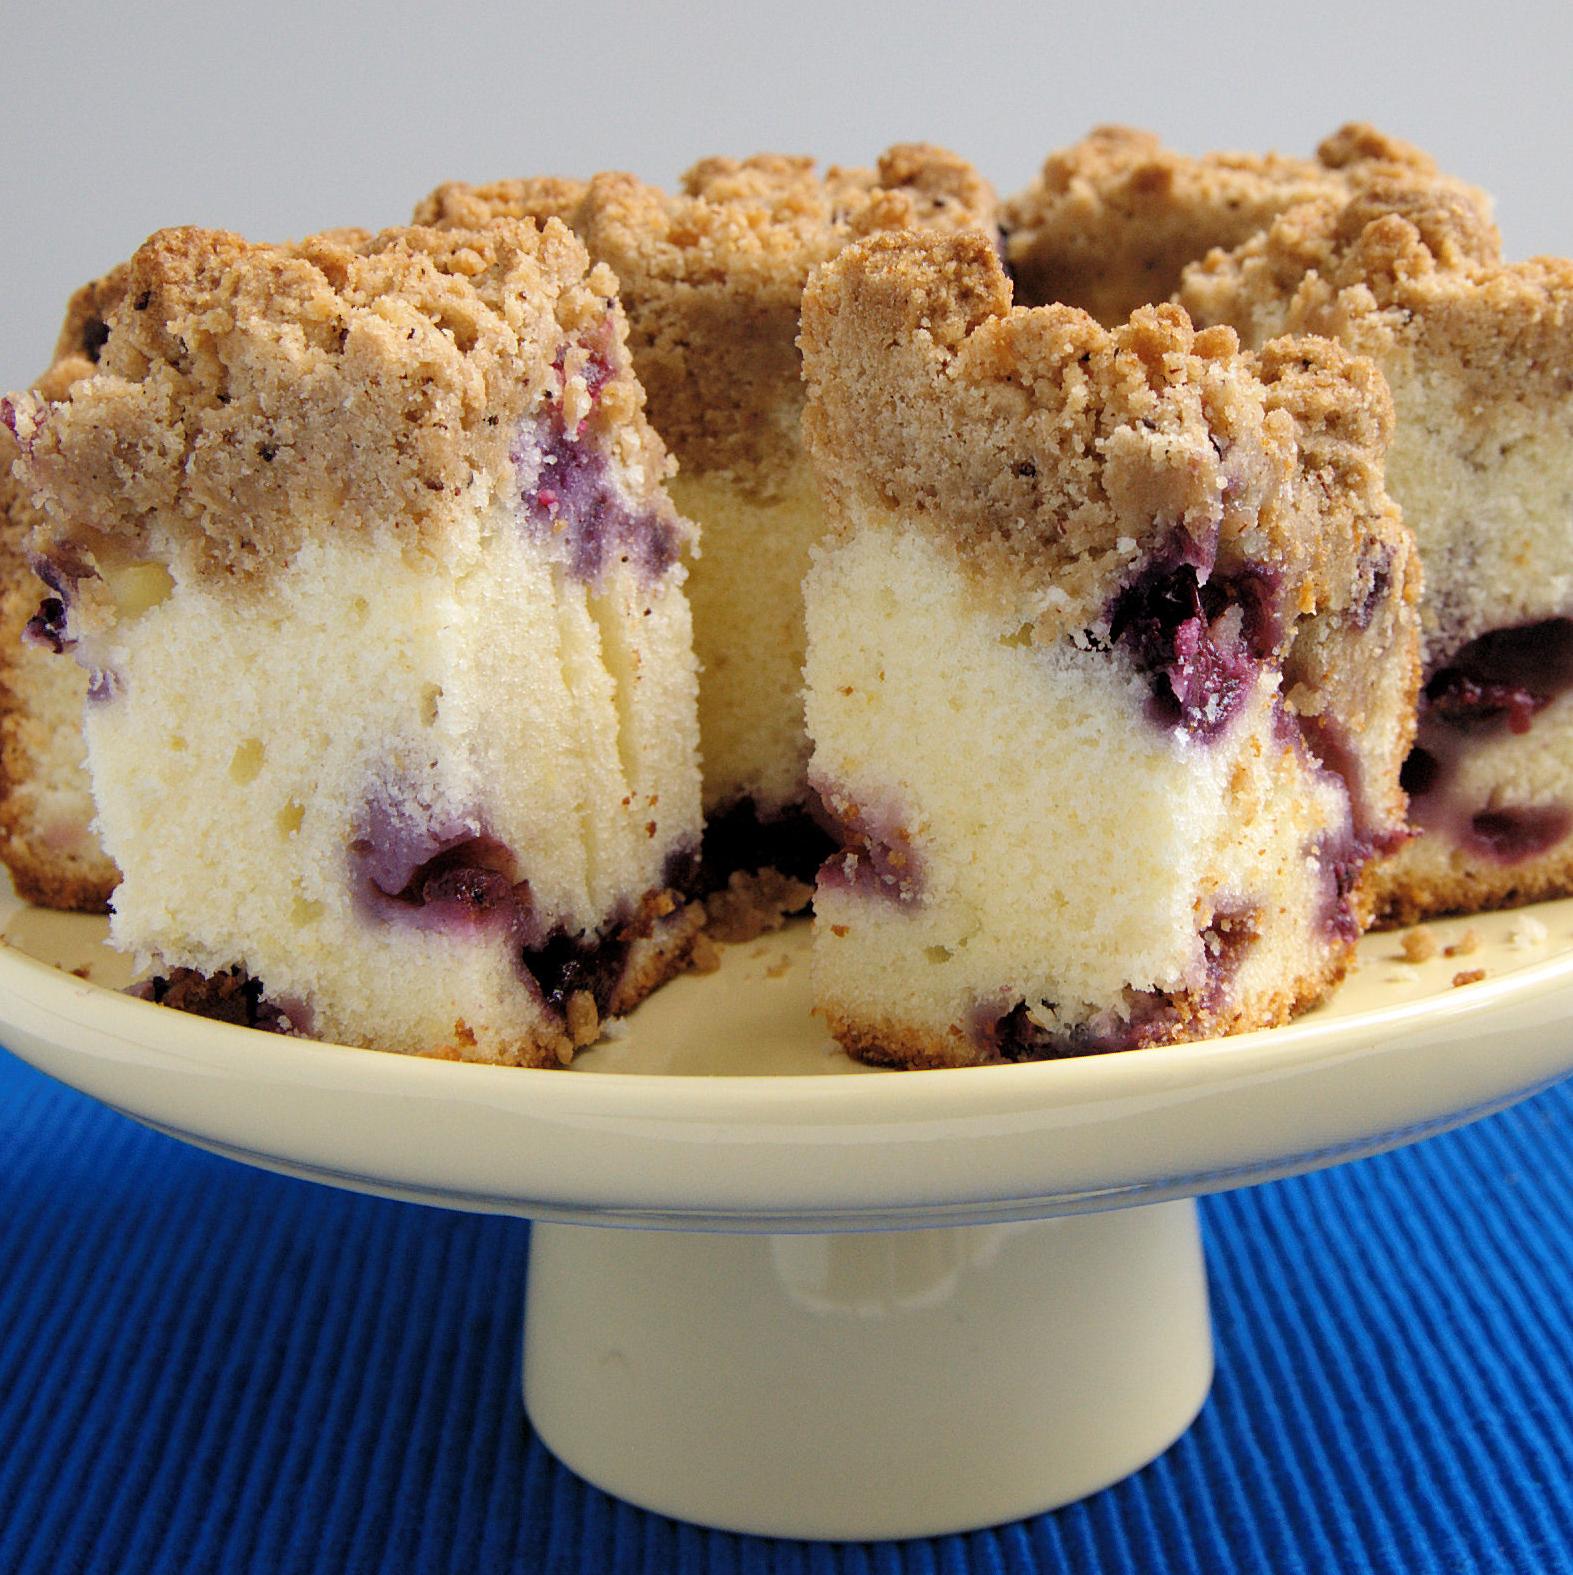  The juicy blueberries add a burst of flavor to this delicious cake.